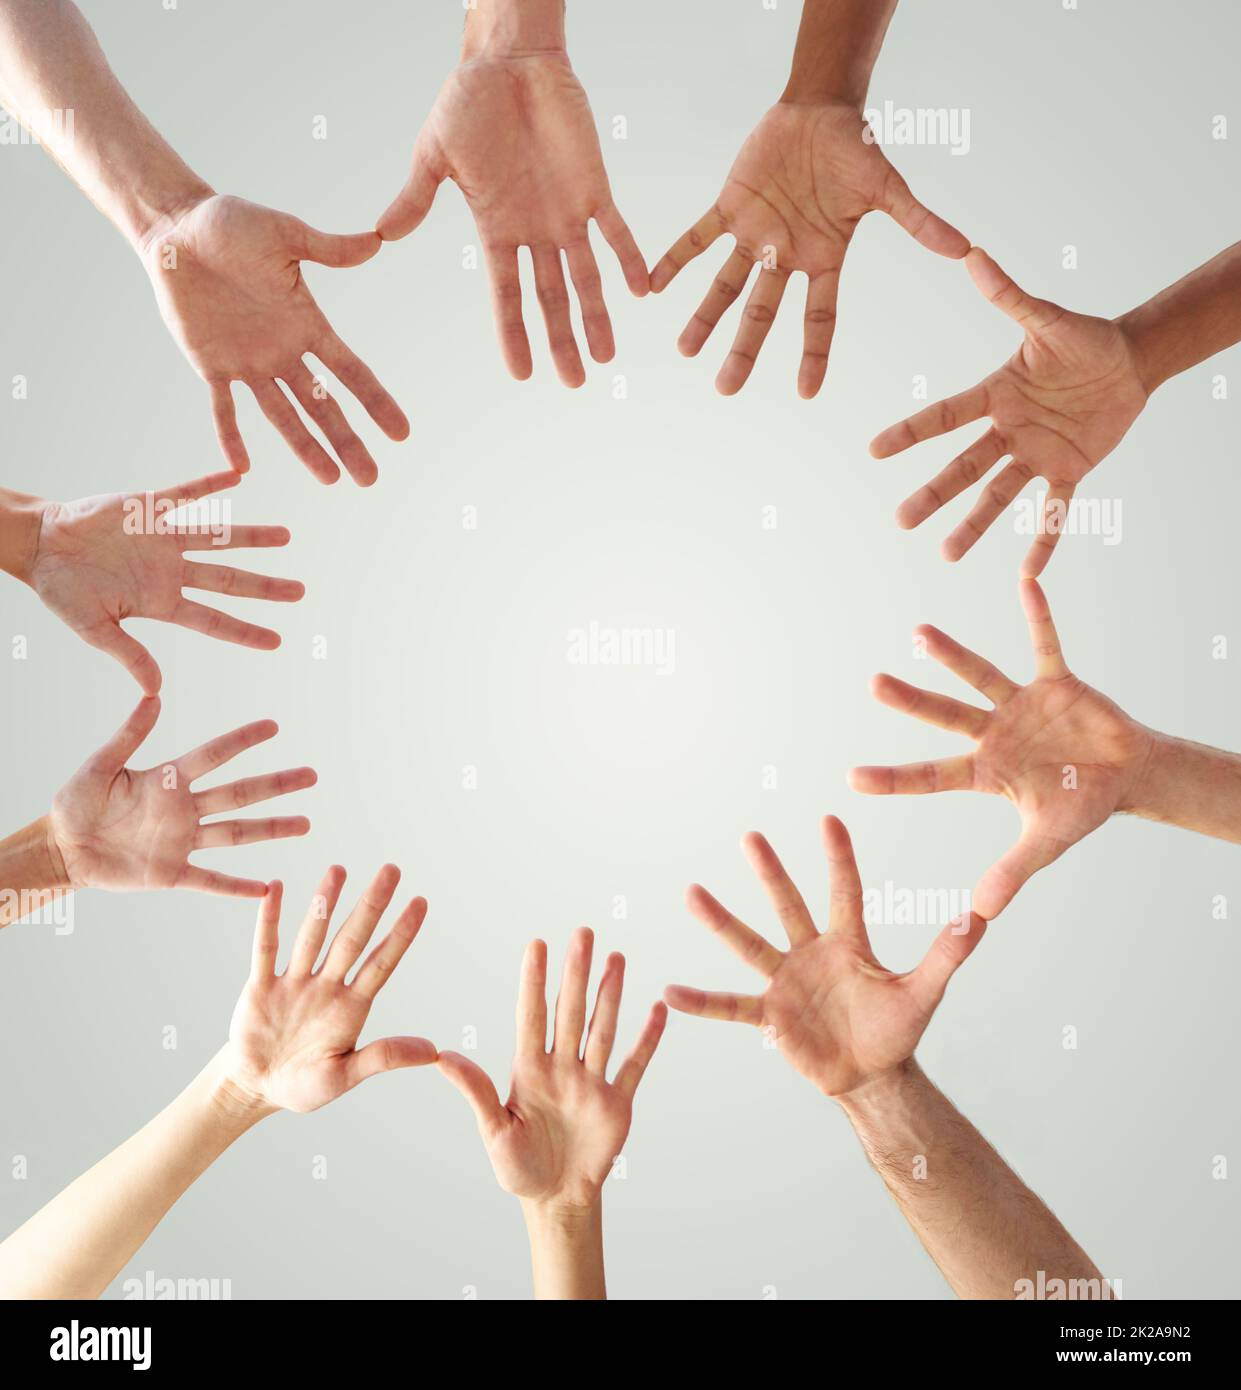 All for one and one for all. Low angle shot of hands in a circle forming a circle. Stock Photo